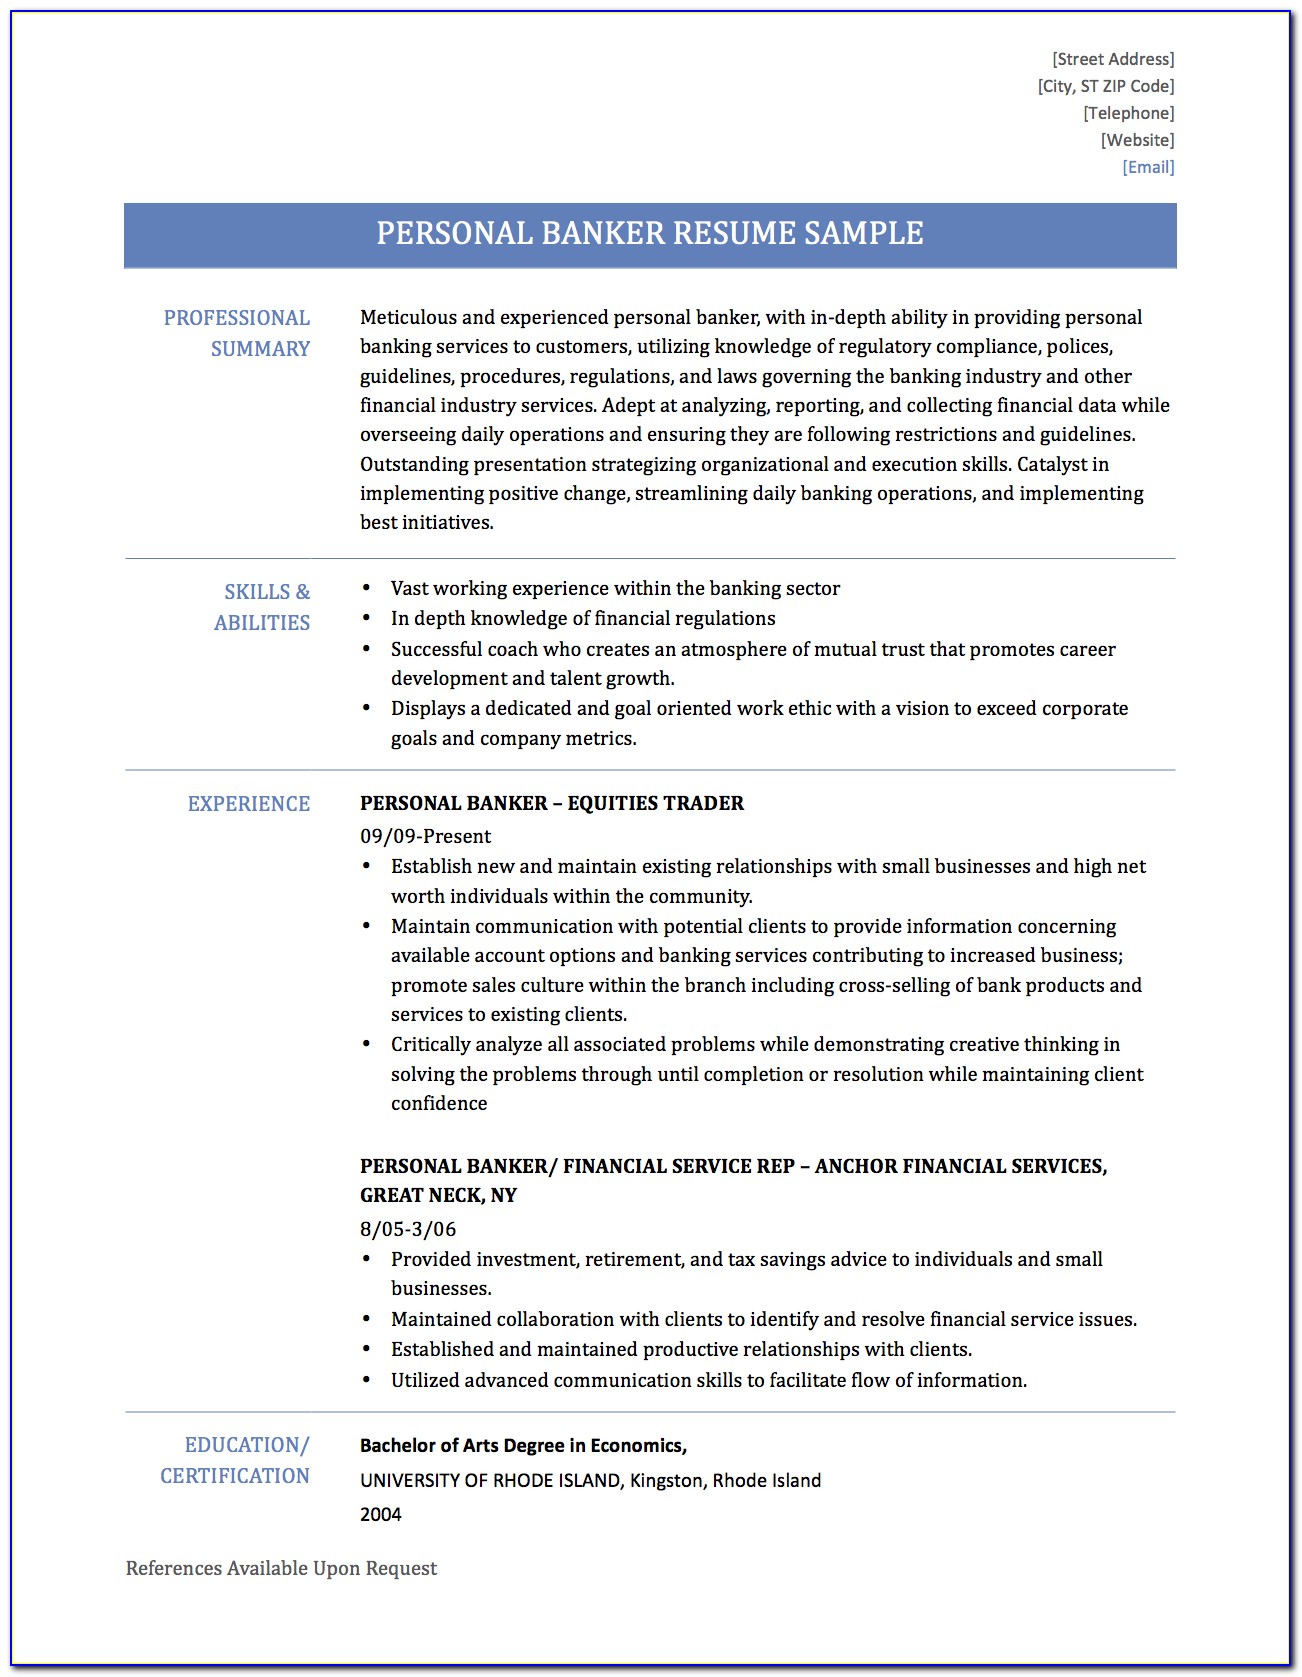 Resume Samples For Experienced Banking Professionals